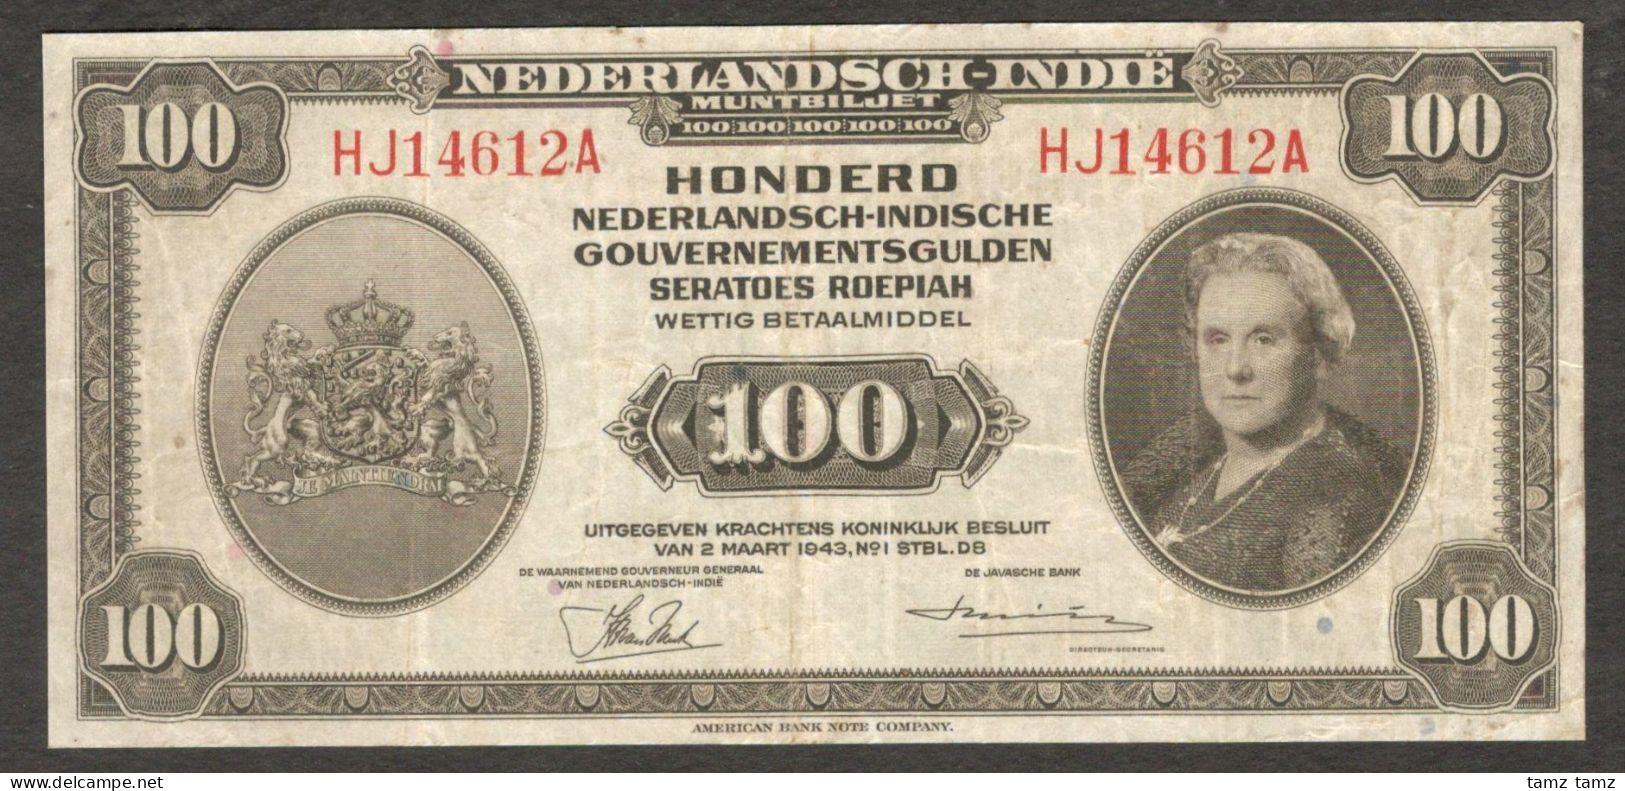 Netherlands Indies Civil Administration NICA Indonesia 100 Gulden P-117 1943 VF - Indonesia